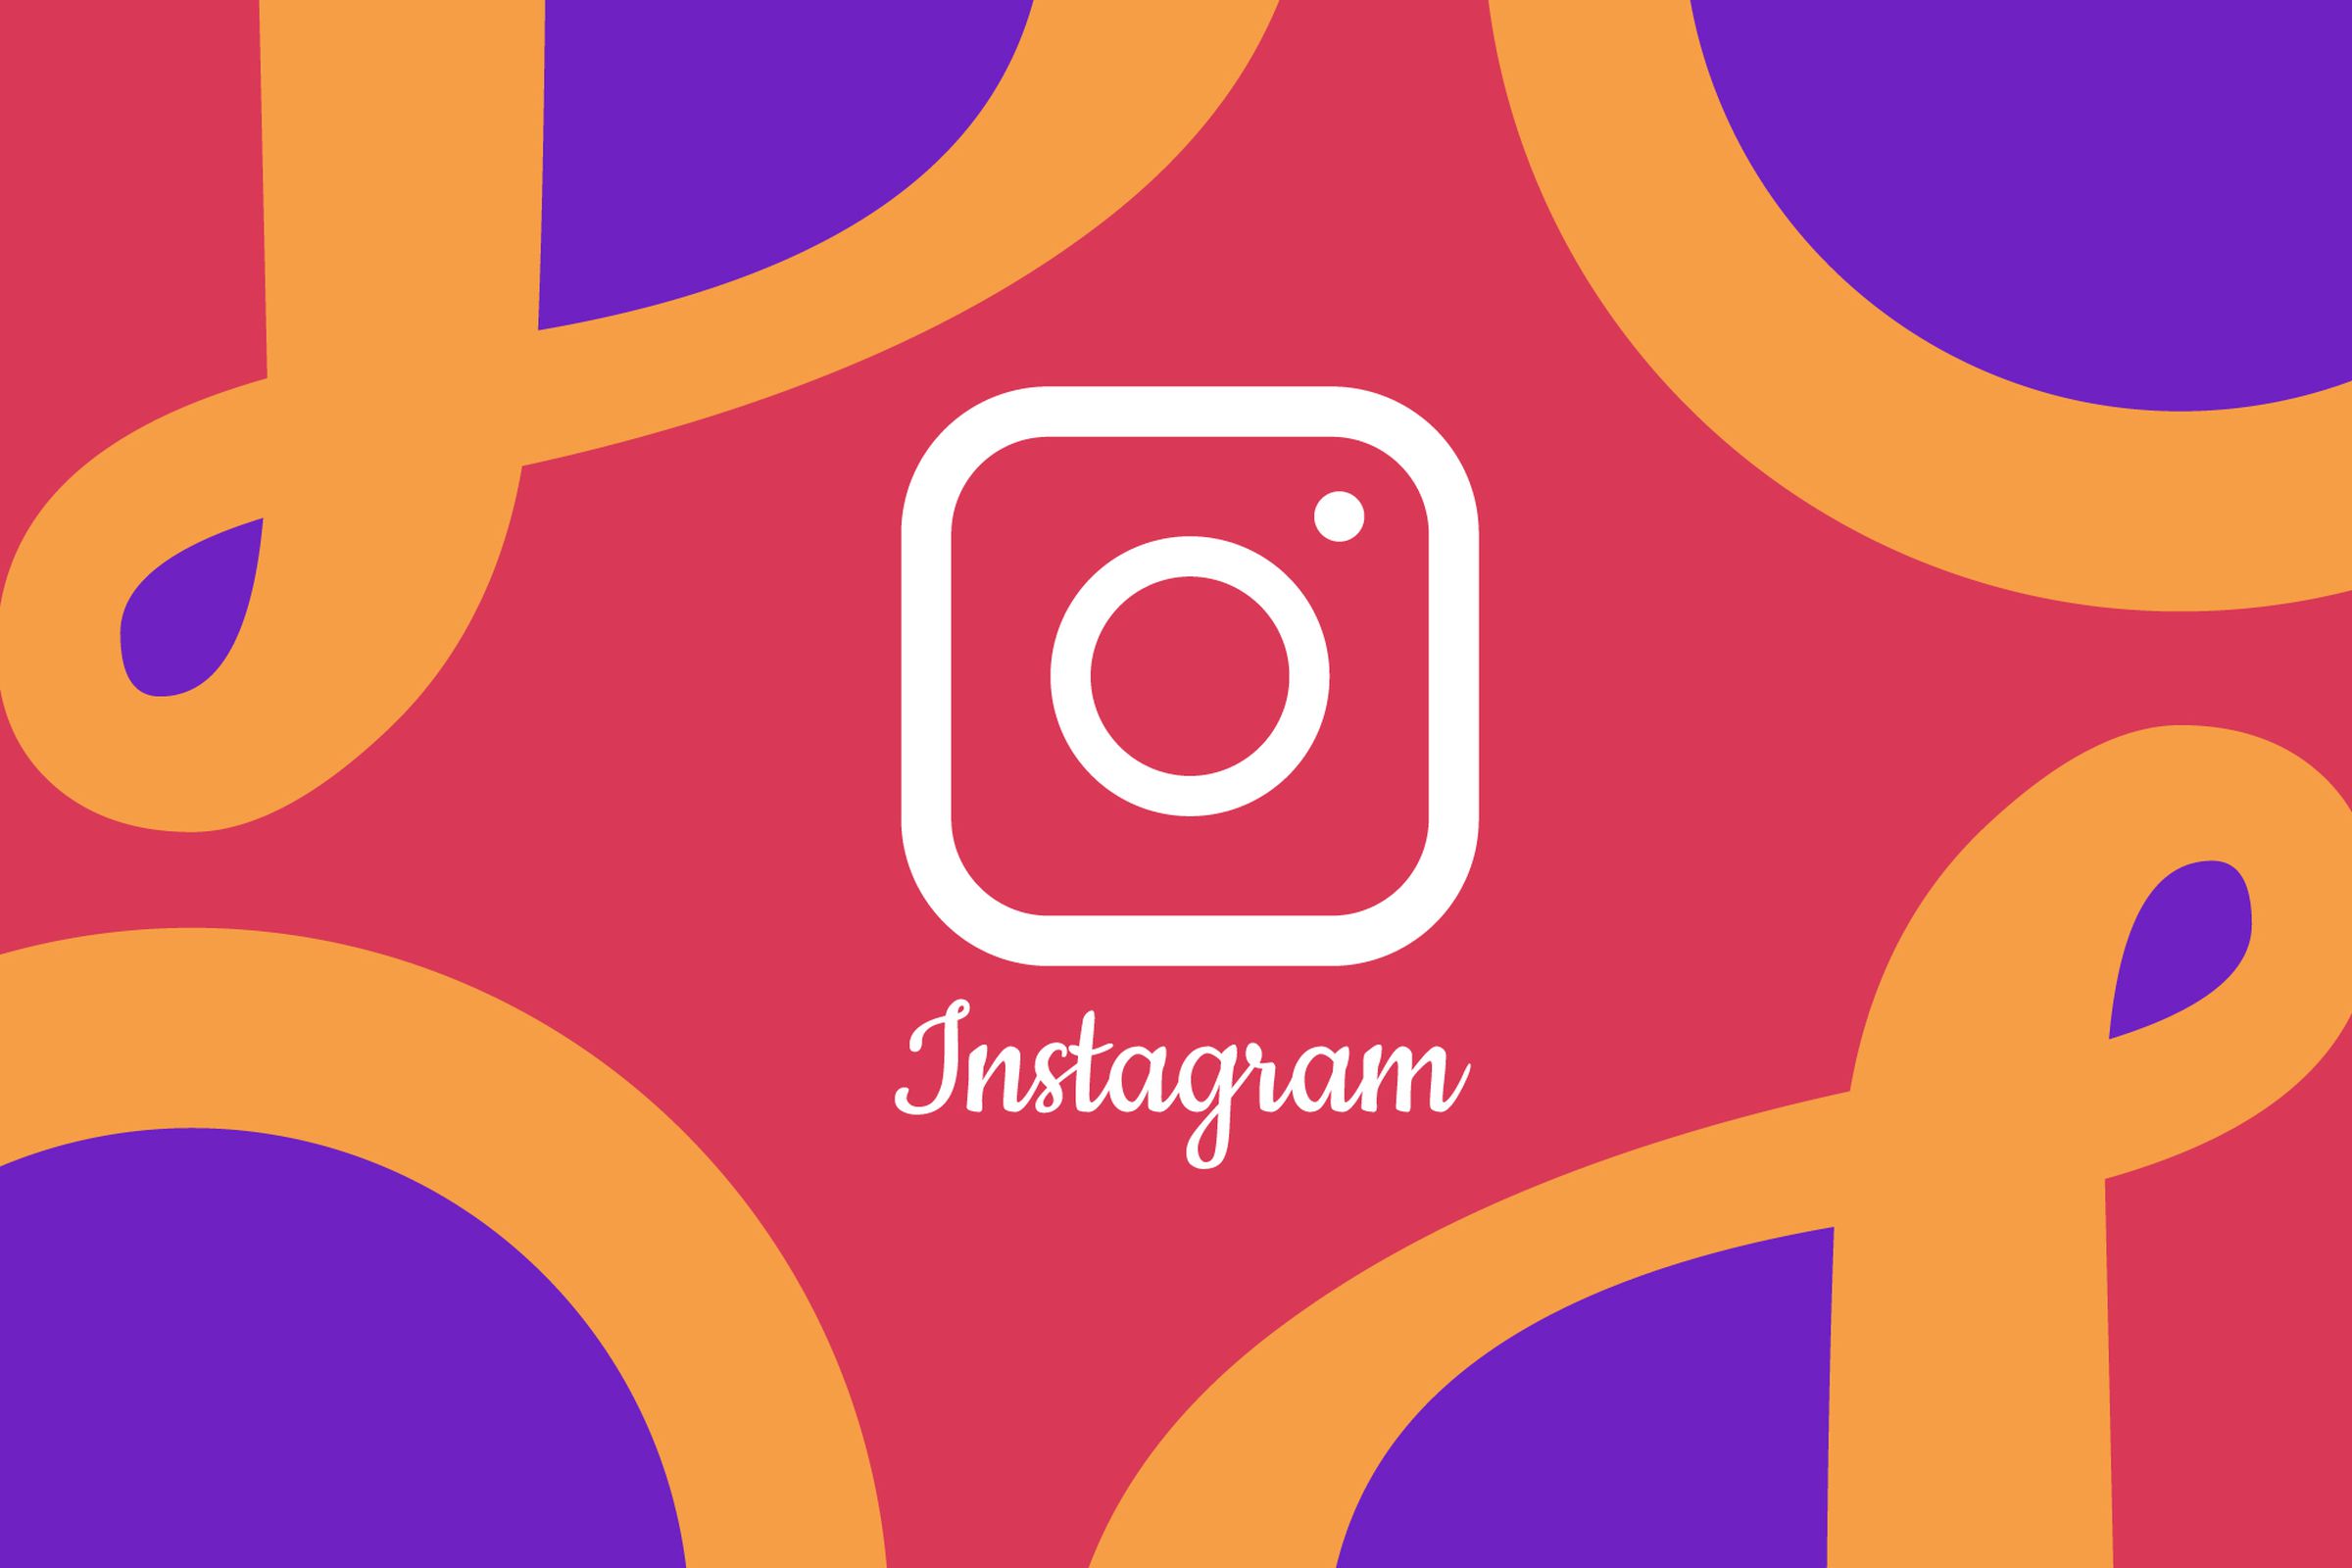 The Instagram icon is featured in the middle of a background filled with pink, orange, and purple shapes.